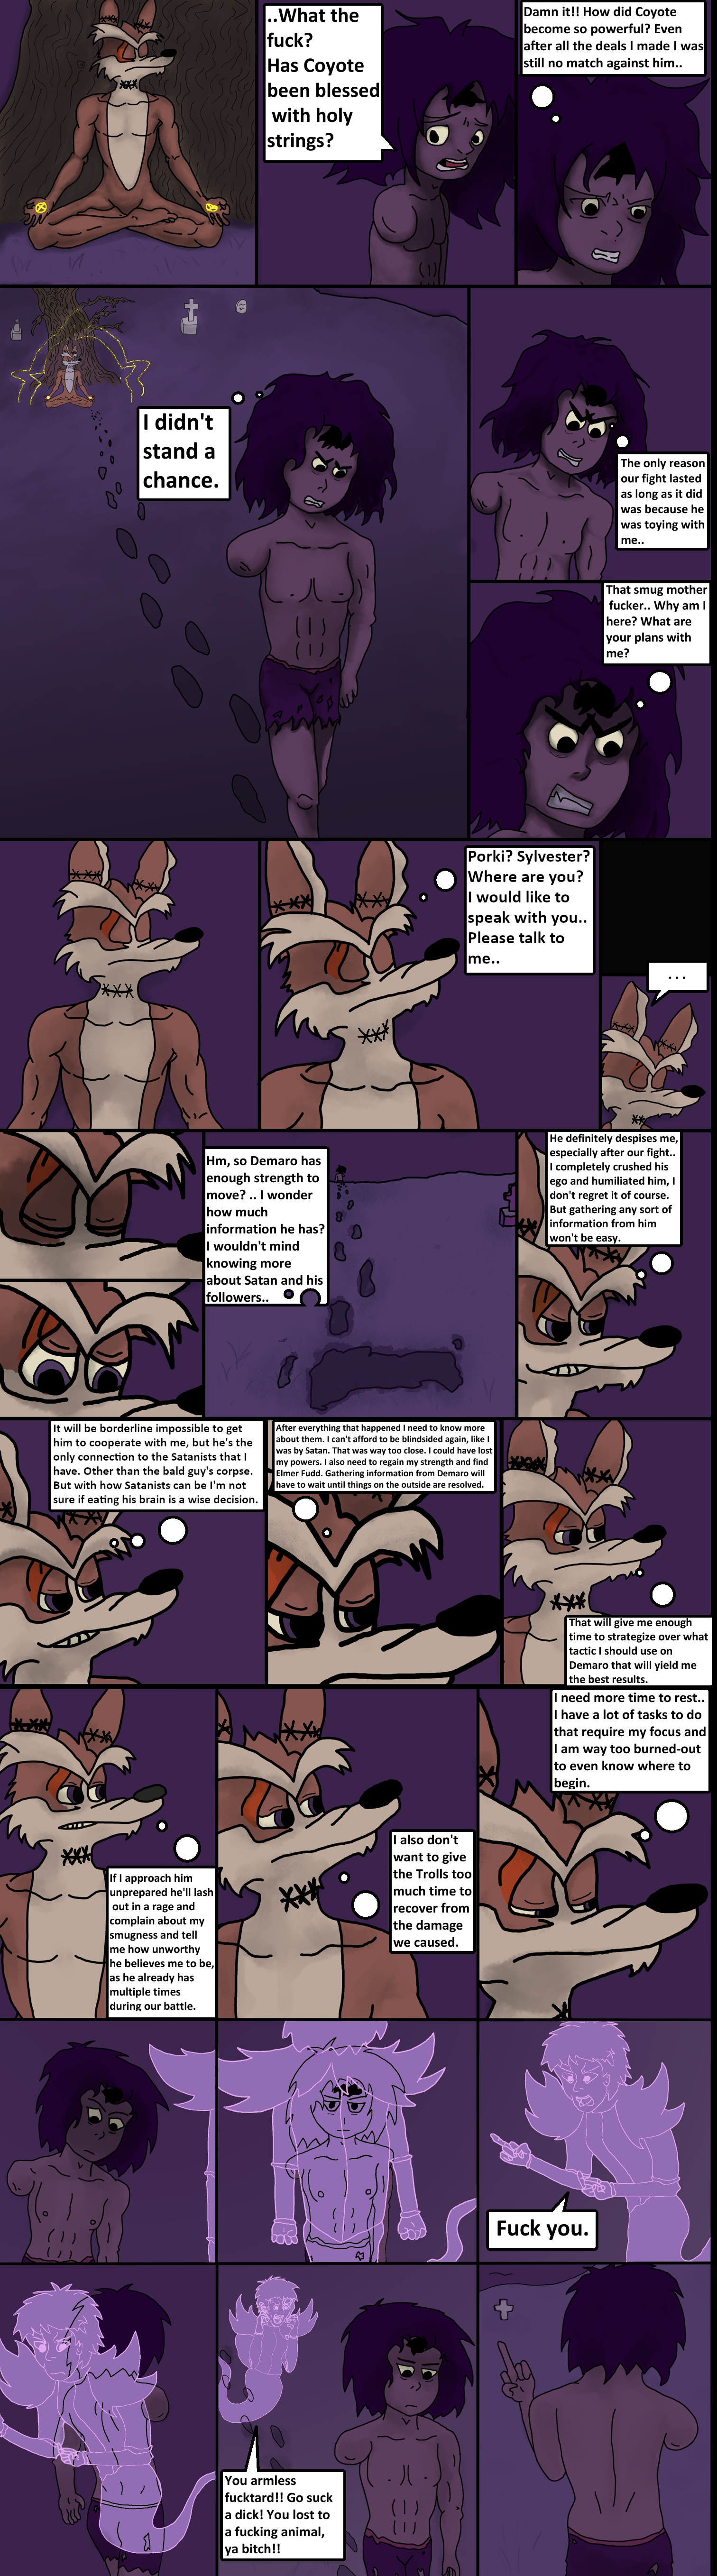 ch27/pg16.png. If you're seeing this, enable images. Or, perhaps we have a website issue. Try refreshing, if unsuccessful email commodorian@tailsgetstrolled.org with a detailed description of how you got here.